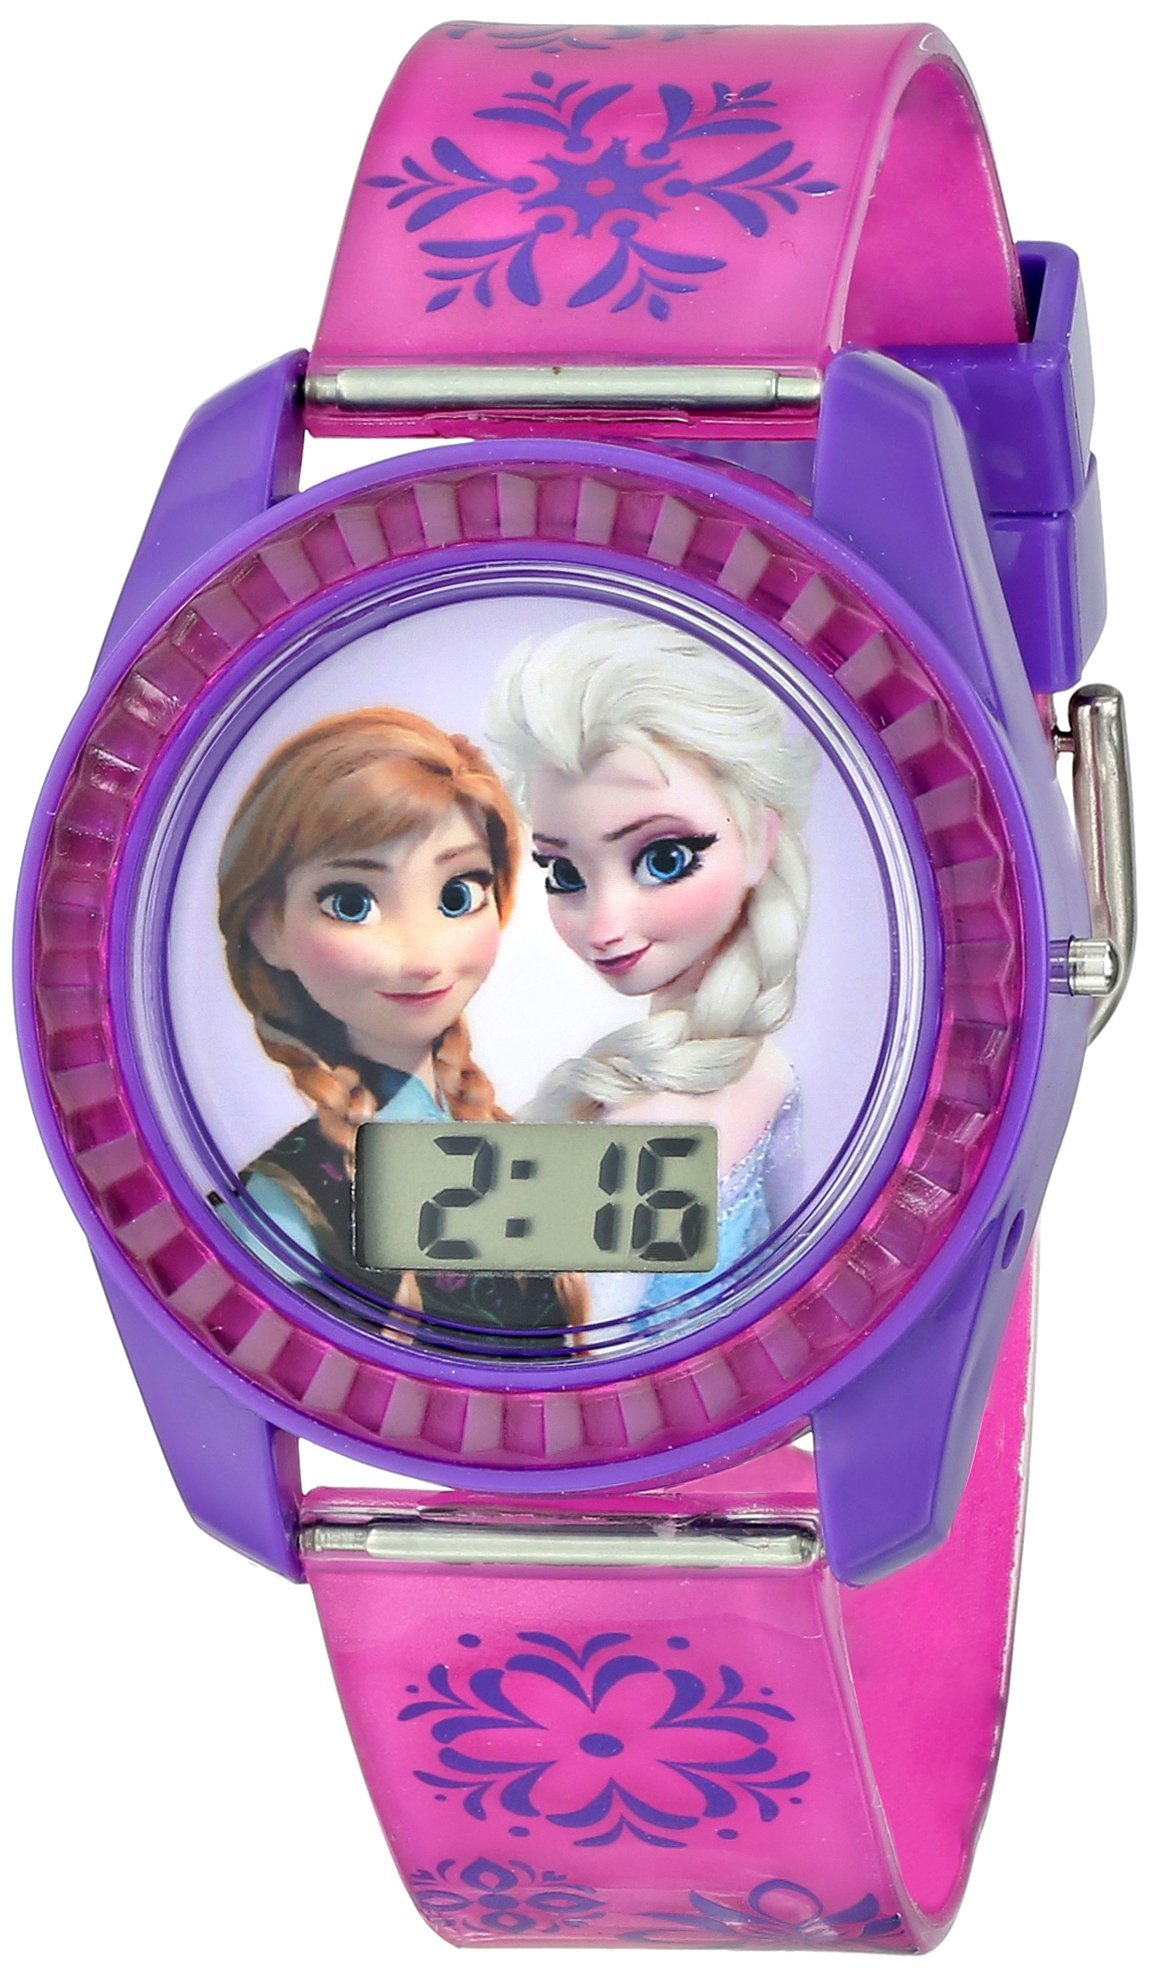 Book Cover Disney's Frozen Kids' Digital Watch with Elsa and Anna on the Dial, Purple Casing, Comfortable Pink Strap, Easy to Buckle, Safe for Children - Model: FZN3598